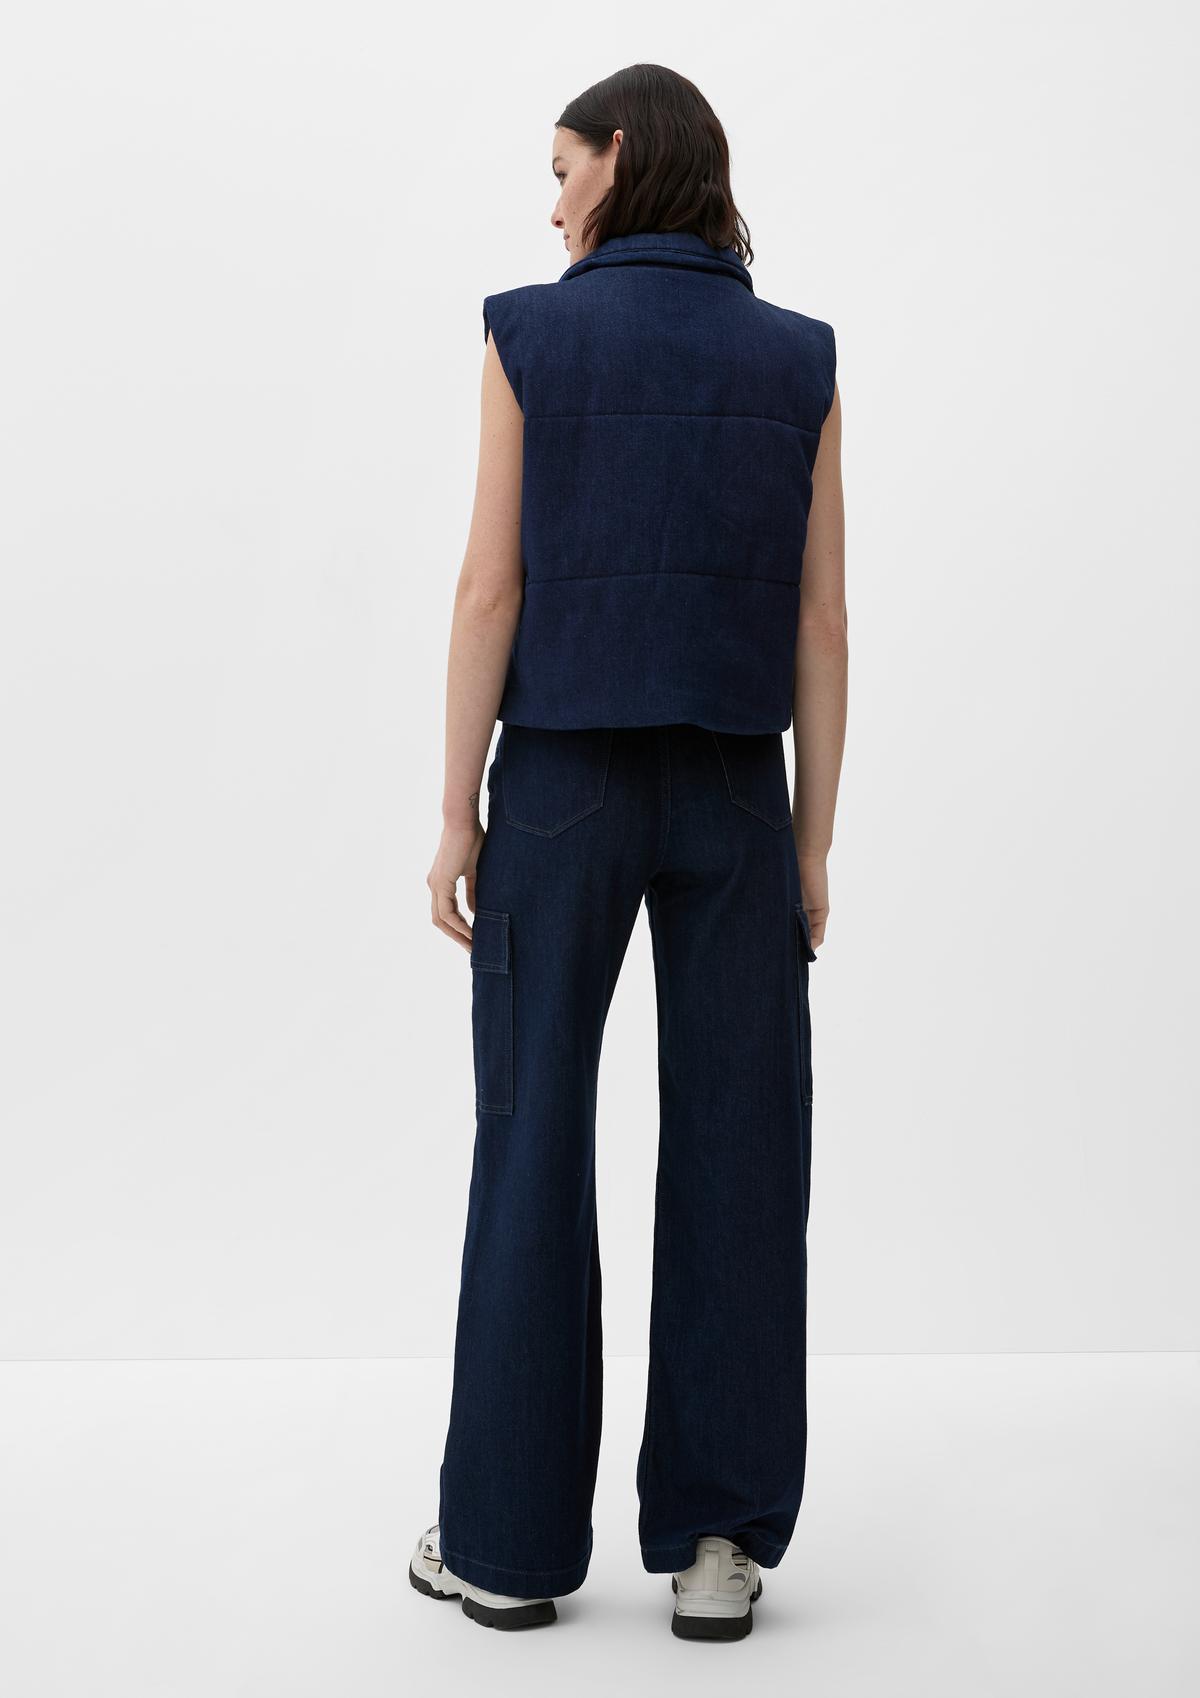 s.Oliver Denim waistcoat with a stand-up collar